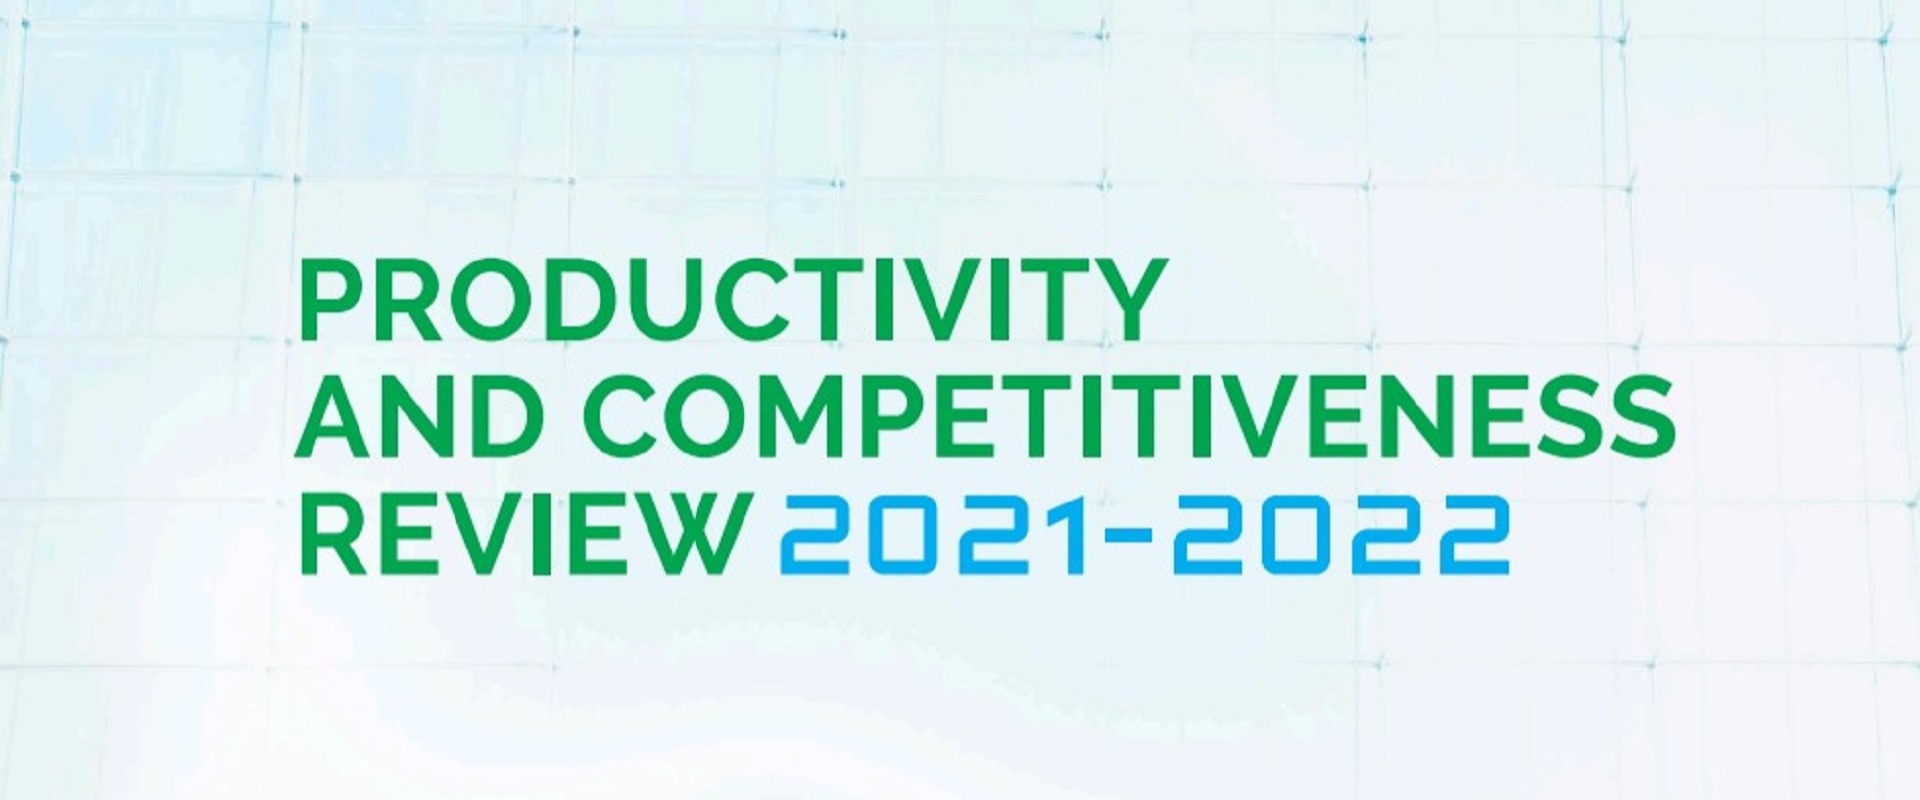 Productivity and Competitiveness Review 2022